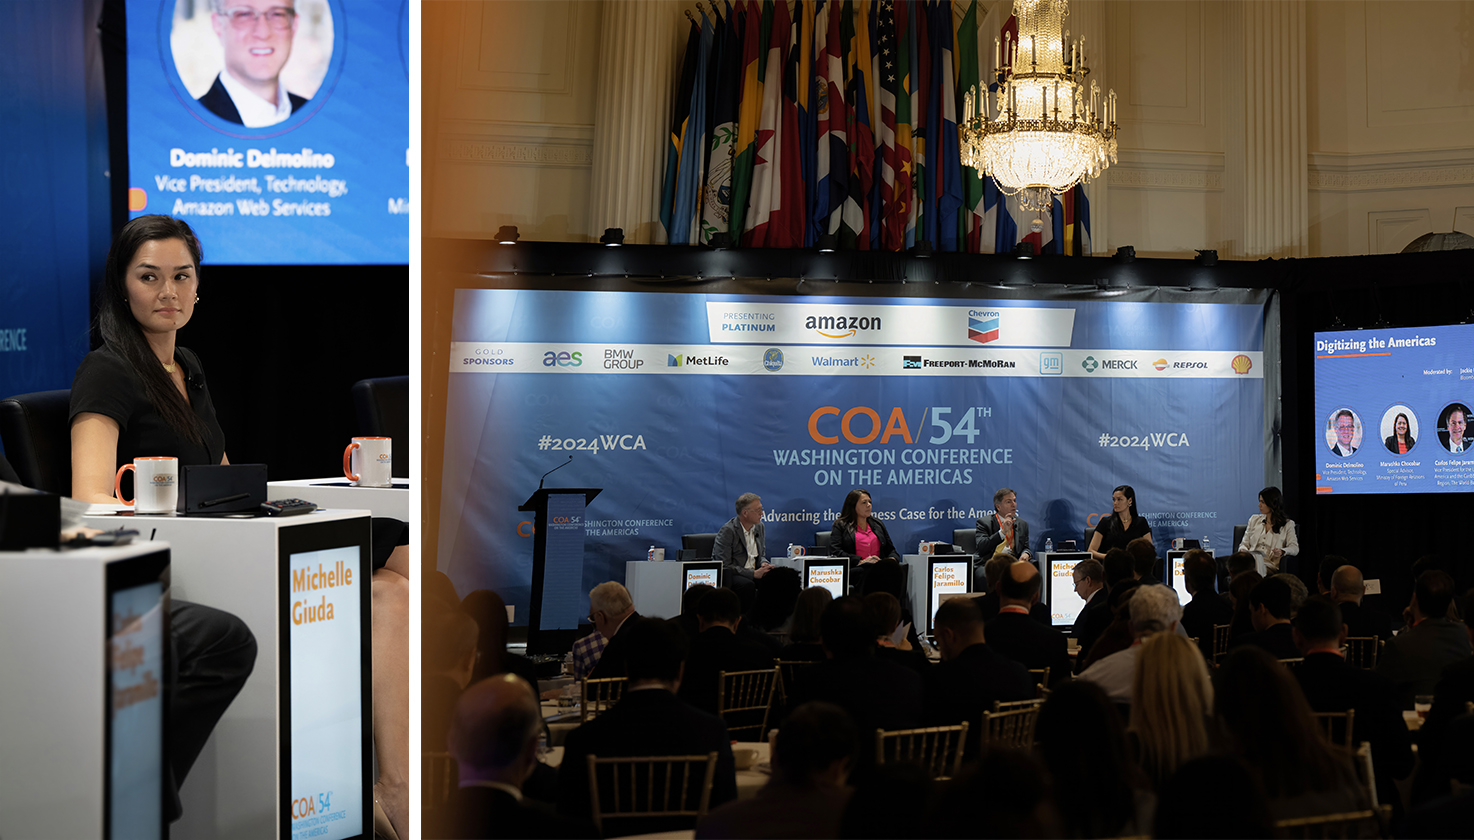 Council of the Americas 54th Washington Conference on the Americas